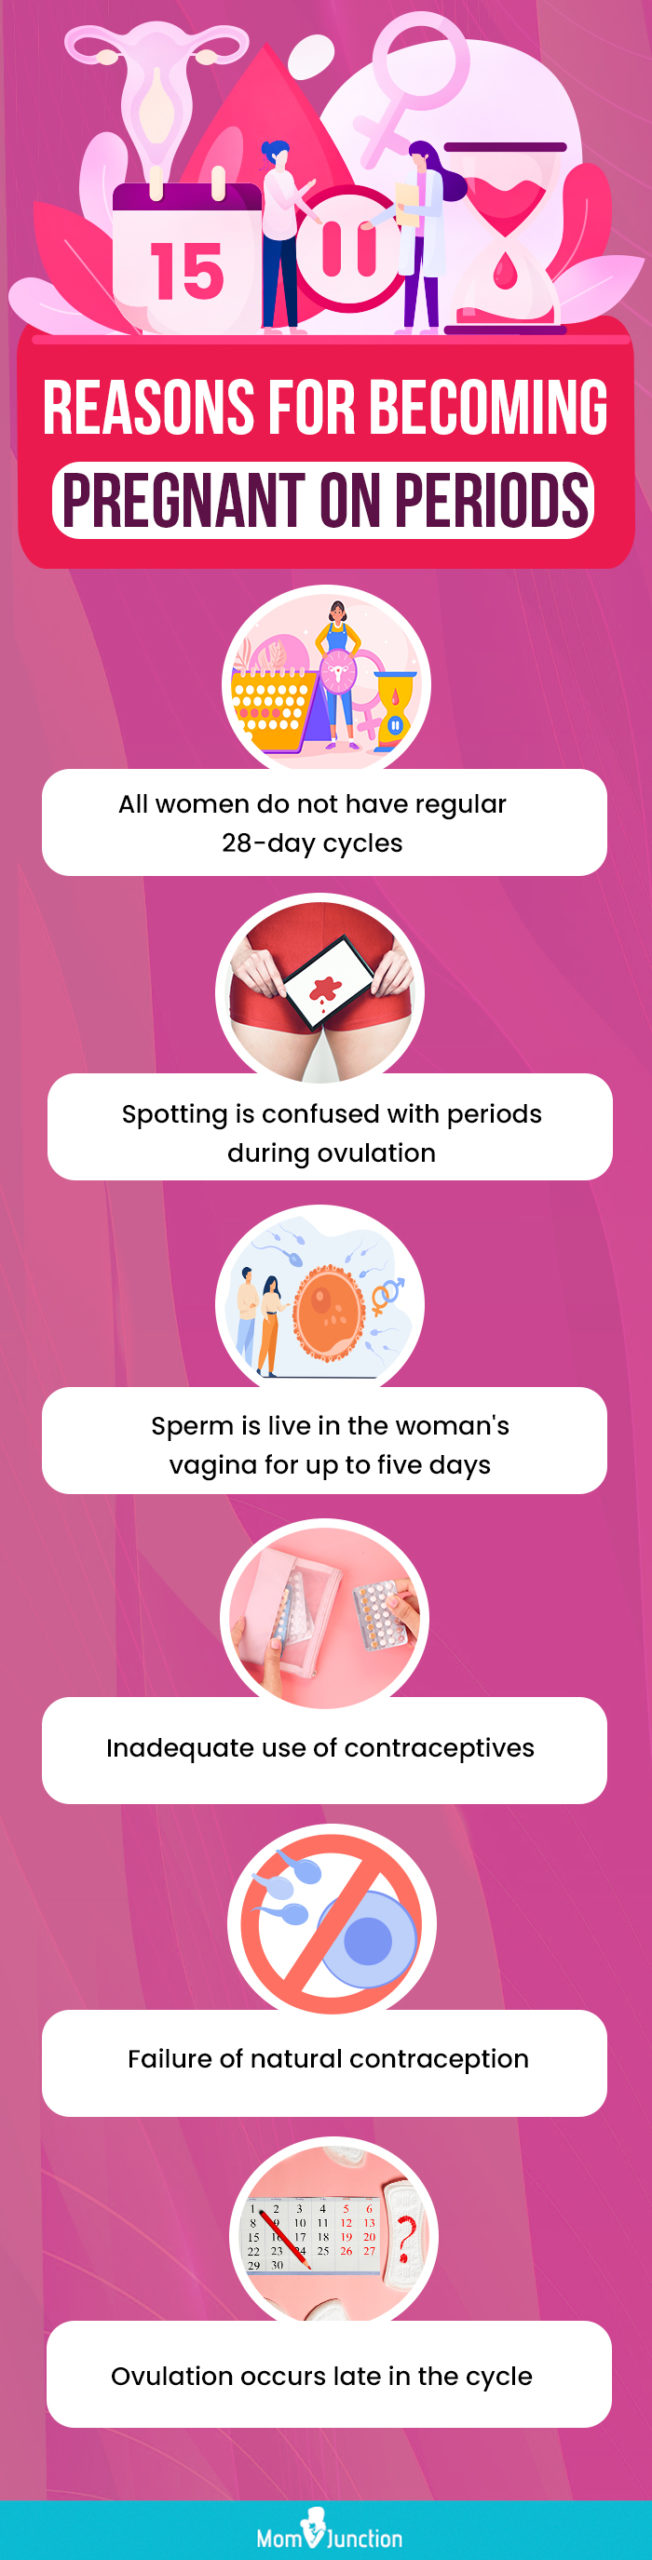 reasons for becoming pregnant on periods (infographic)